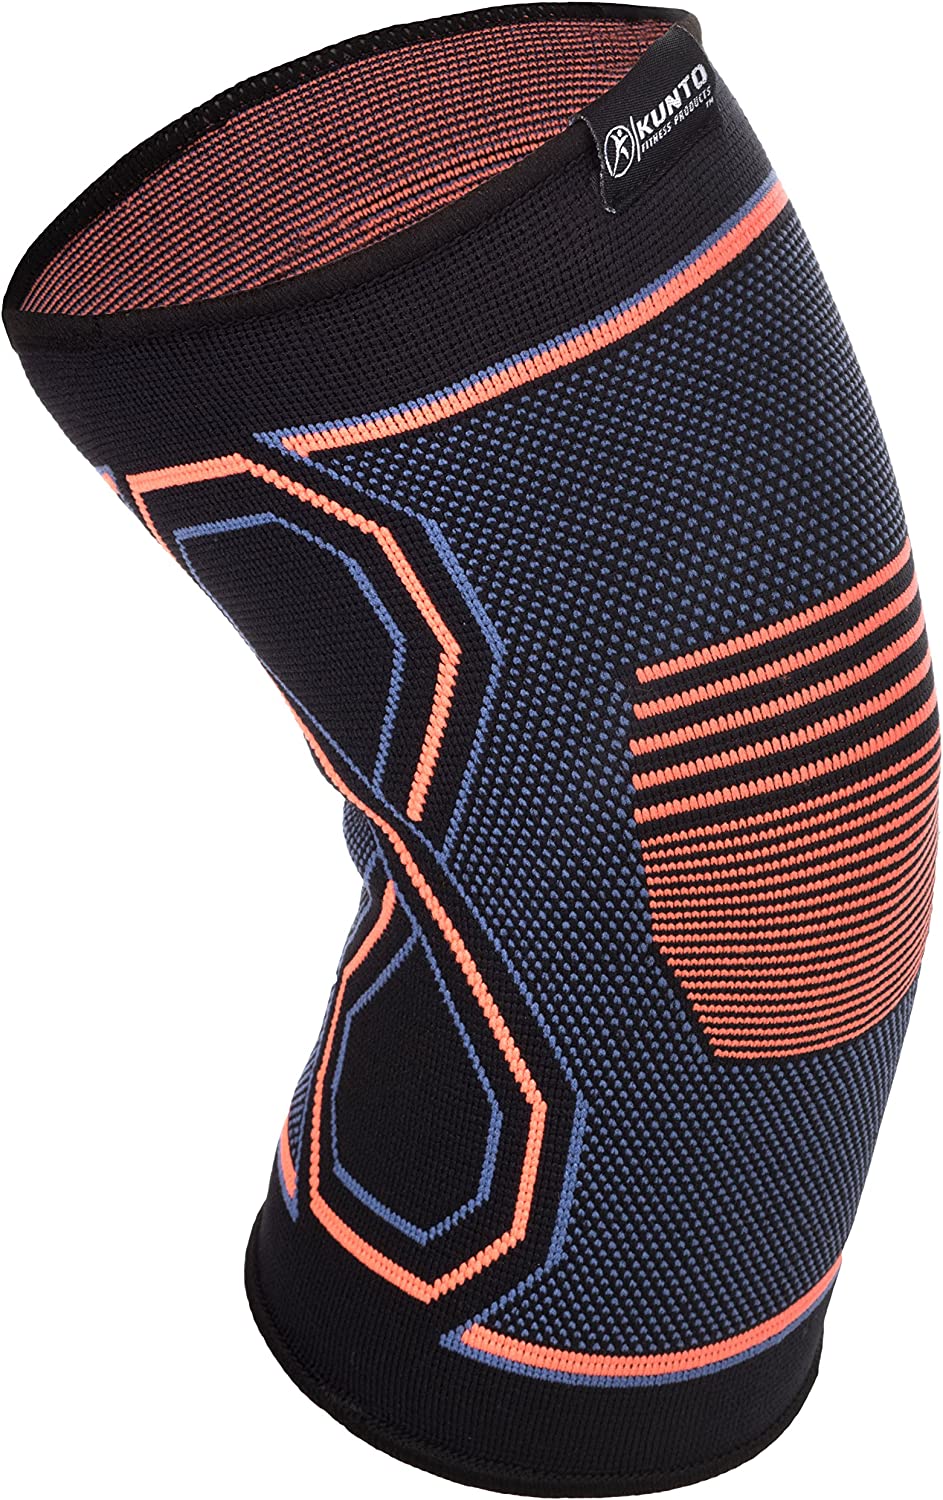 Knee Brace Compression Support Sleeve by Kunto Fitness